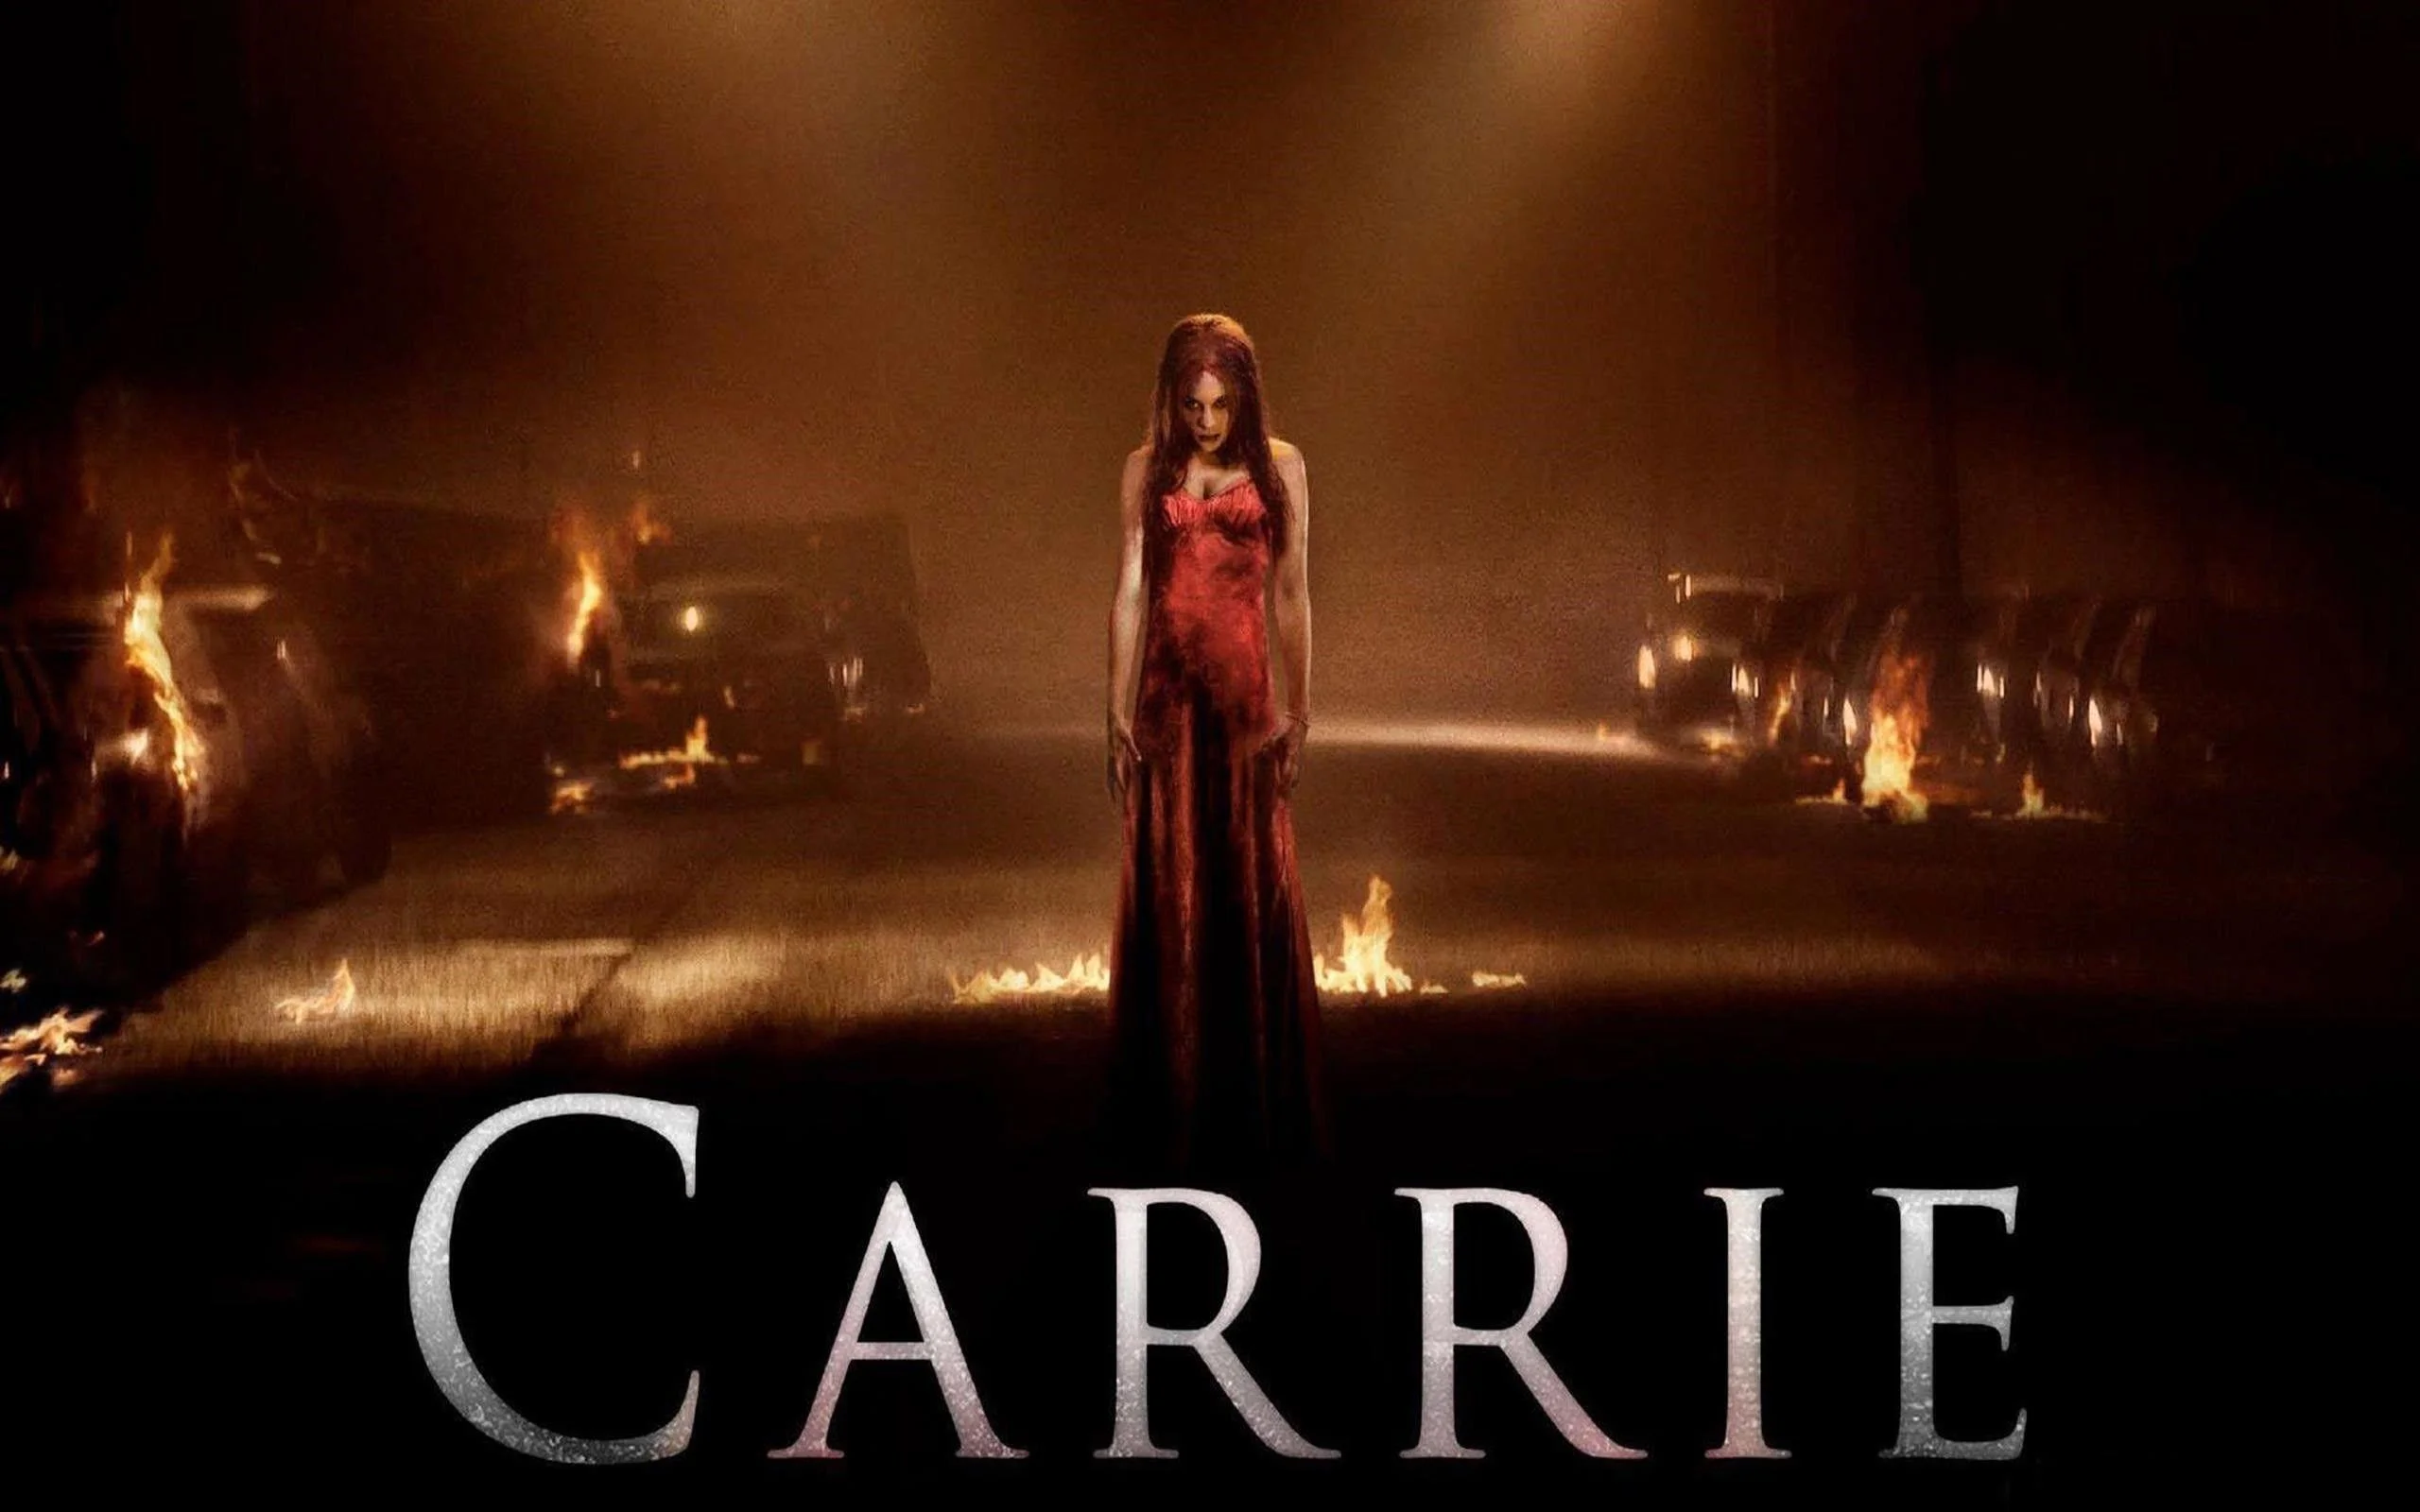 Carrie Hollywood Horror Movie HD Wallpaper Desktop Backgrounds Free